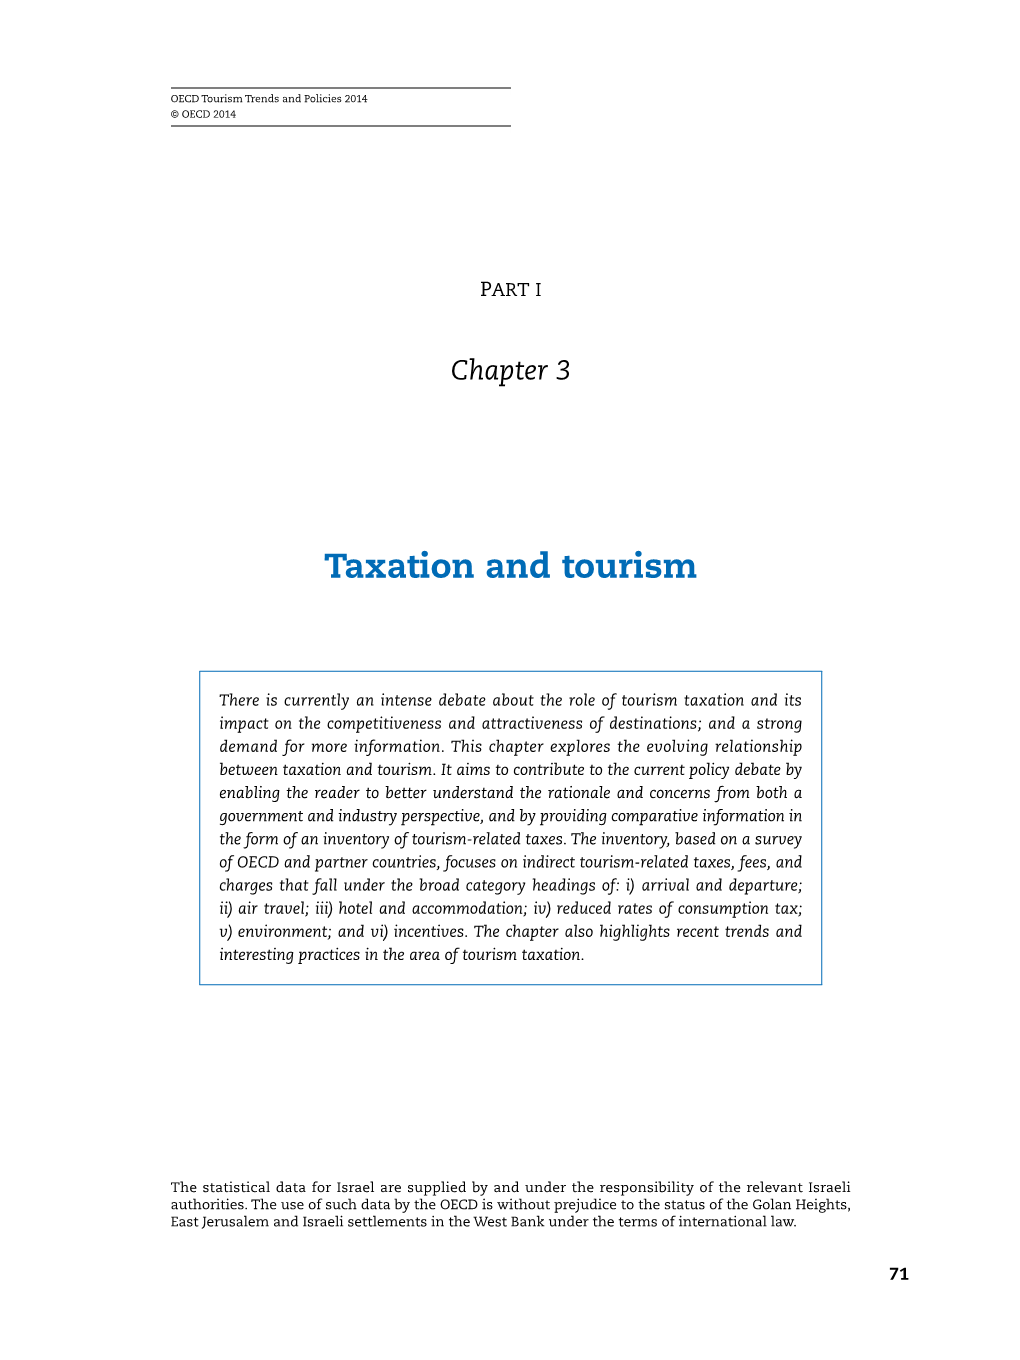 Taxation and Tourism